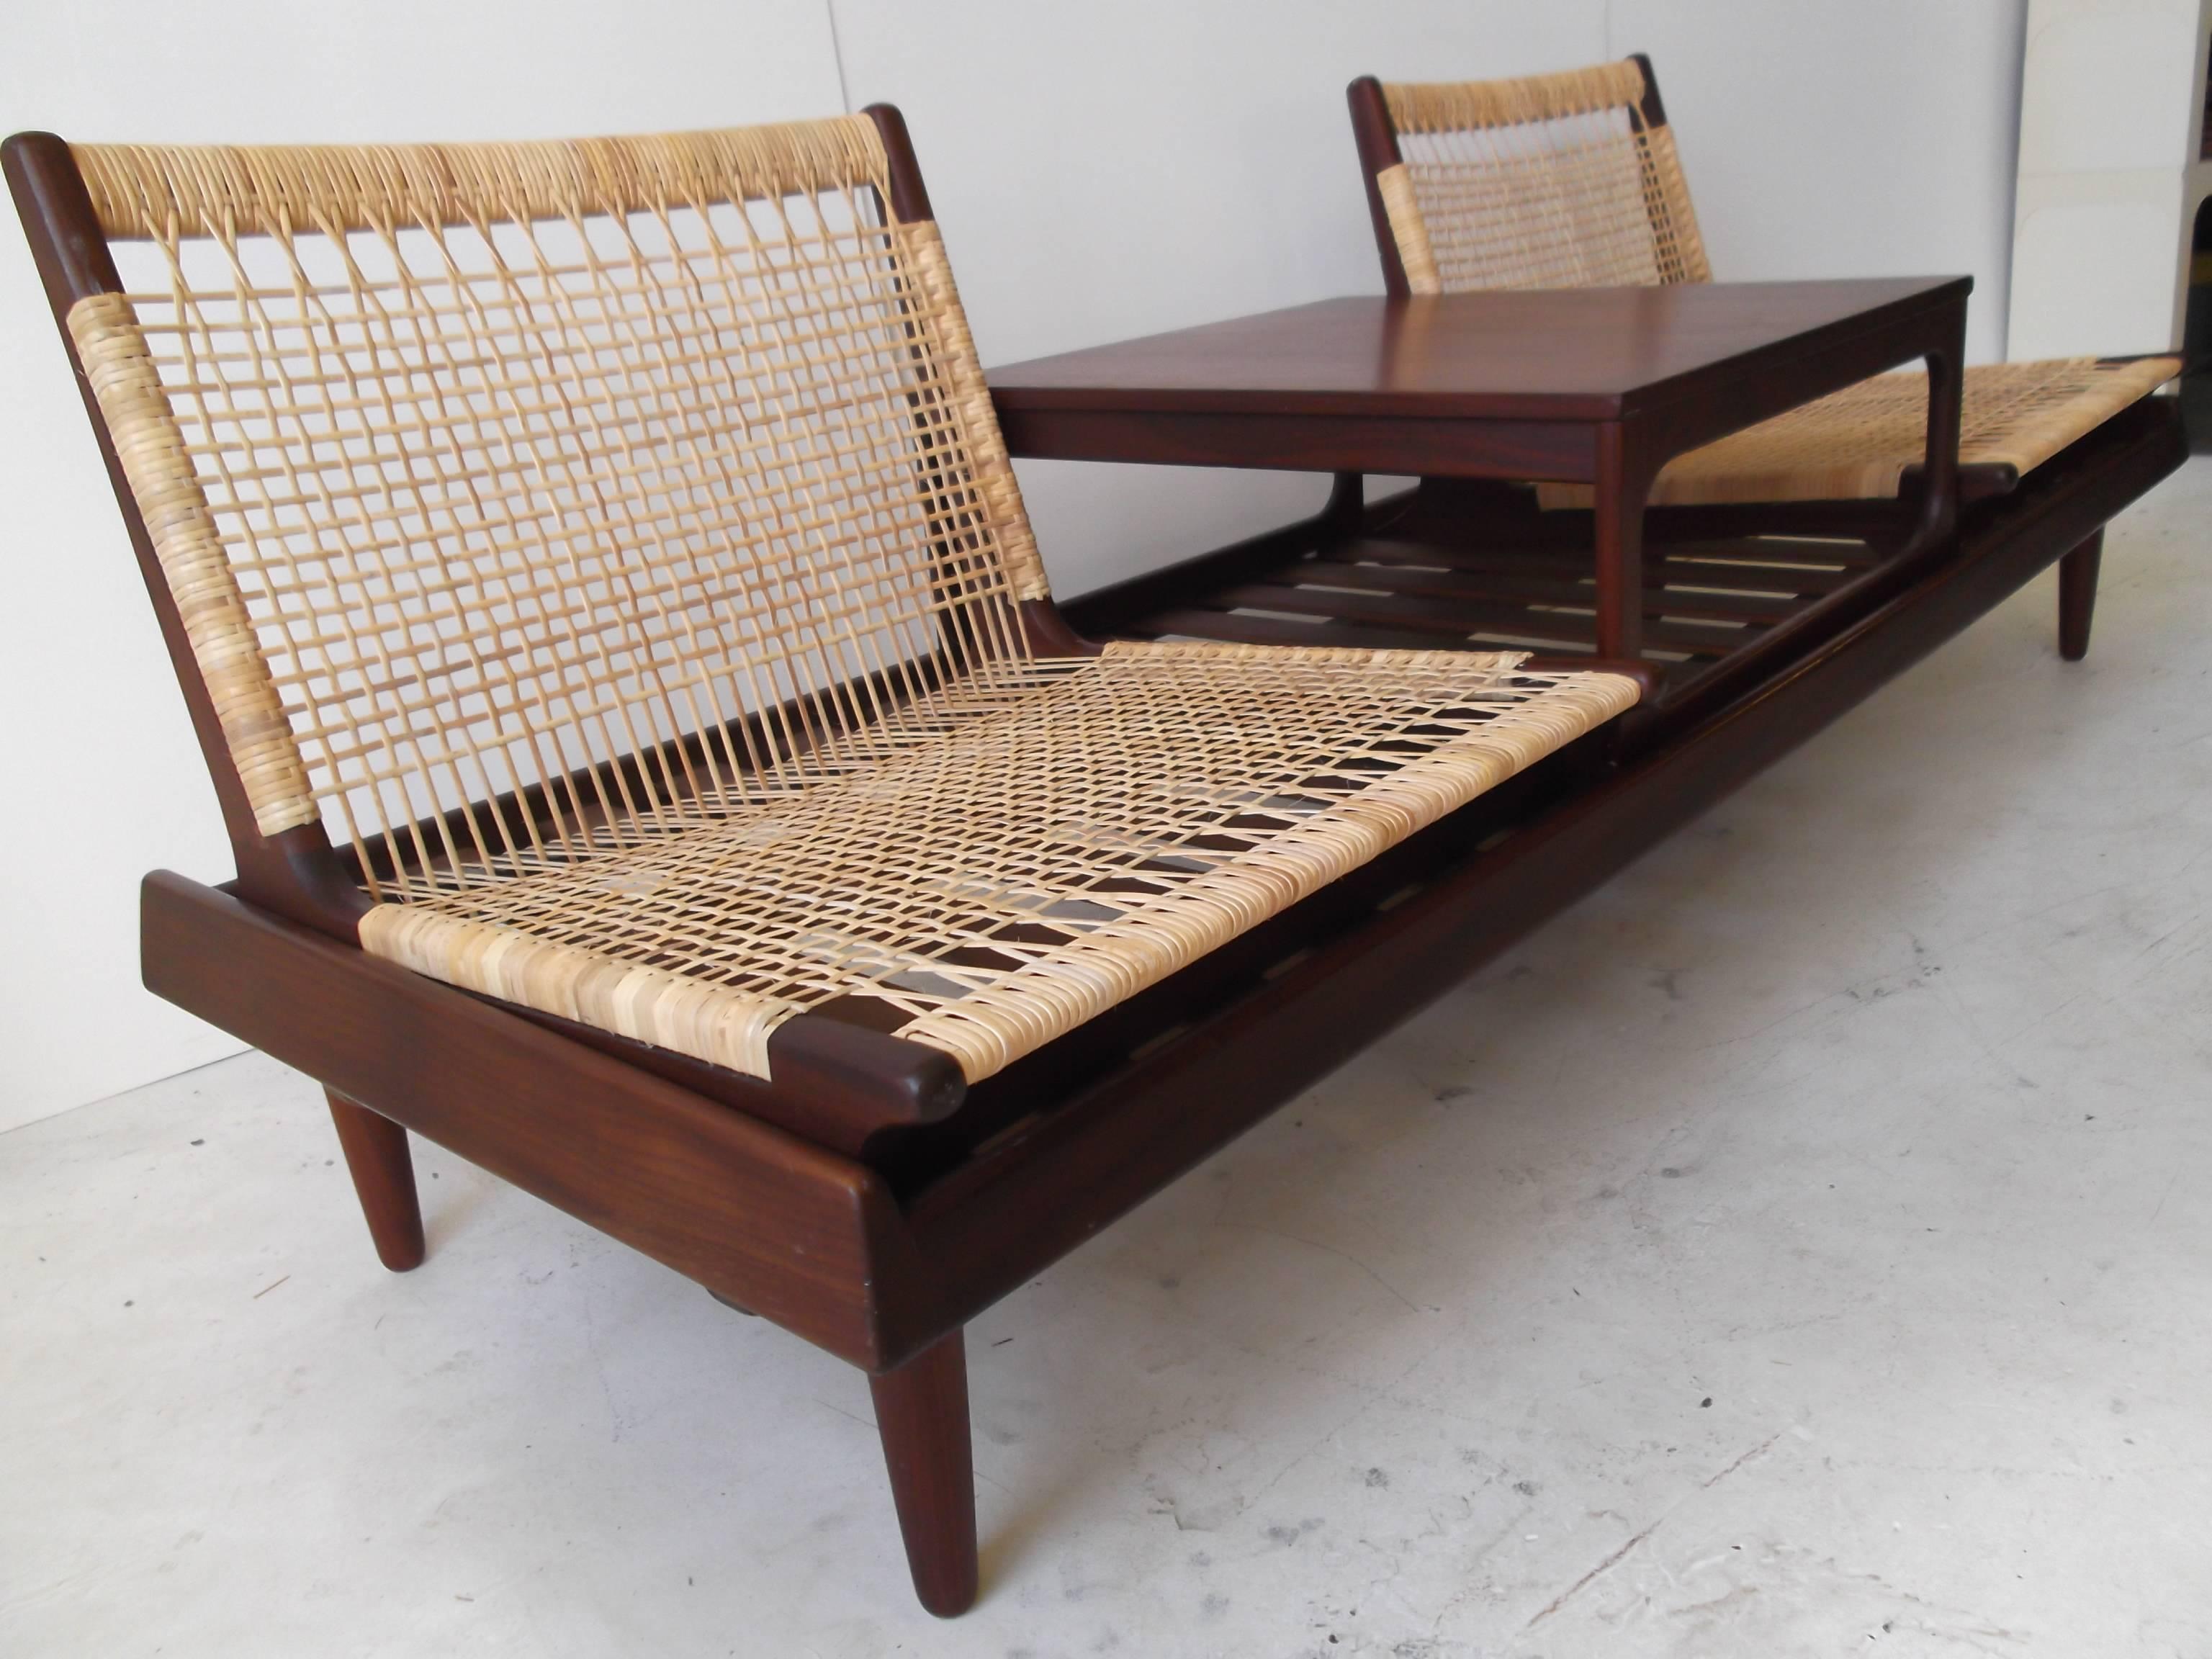 This is a very nice Danish modern sofa by Hans Olsen for Bramin. It is from the 1950s in dark teak. It has two beautifully woven caned seats and a table that rest on a bench. The caning has all been rewoven perfectly. It has orig. heavy foam